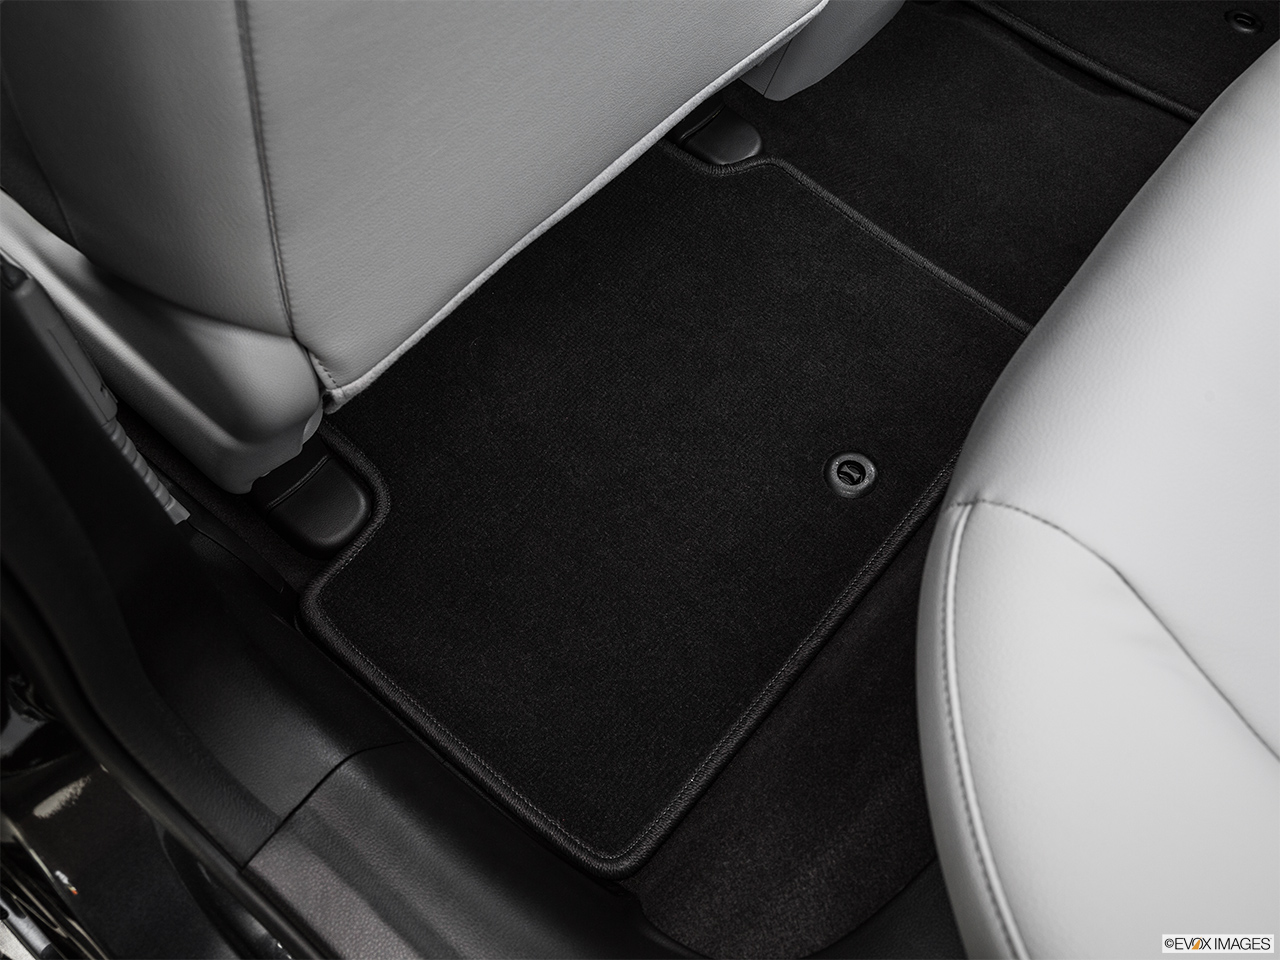 2016 Acura ILX Base Rear driver's side floor mat. Mid-seat level from outside looking in. 